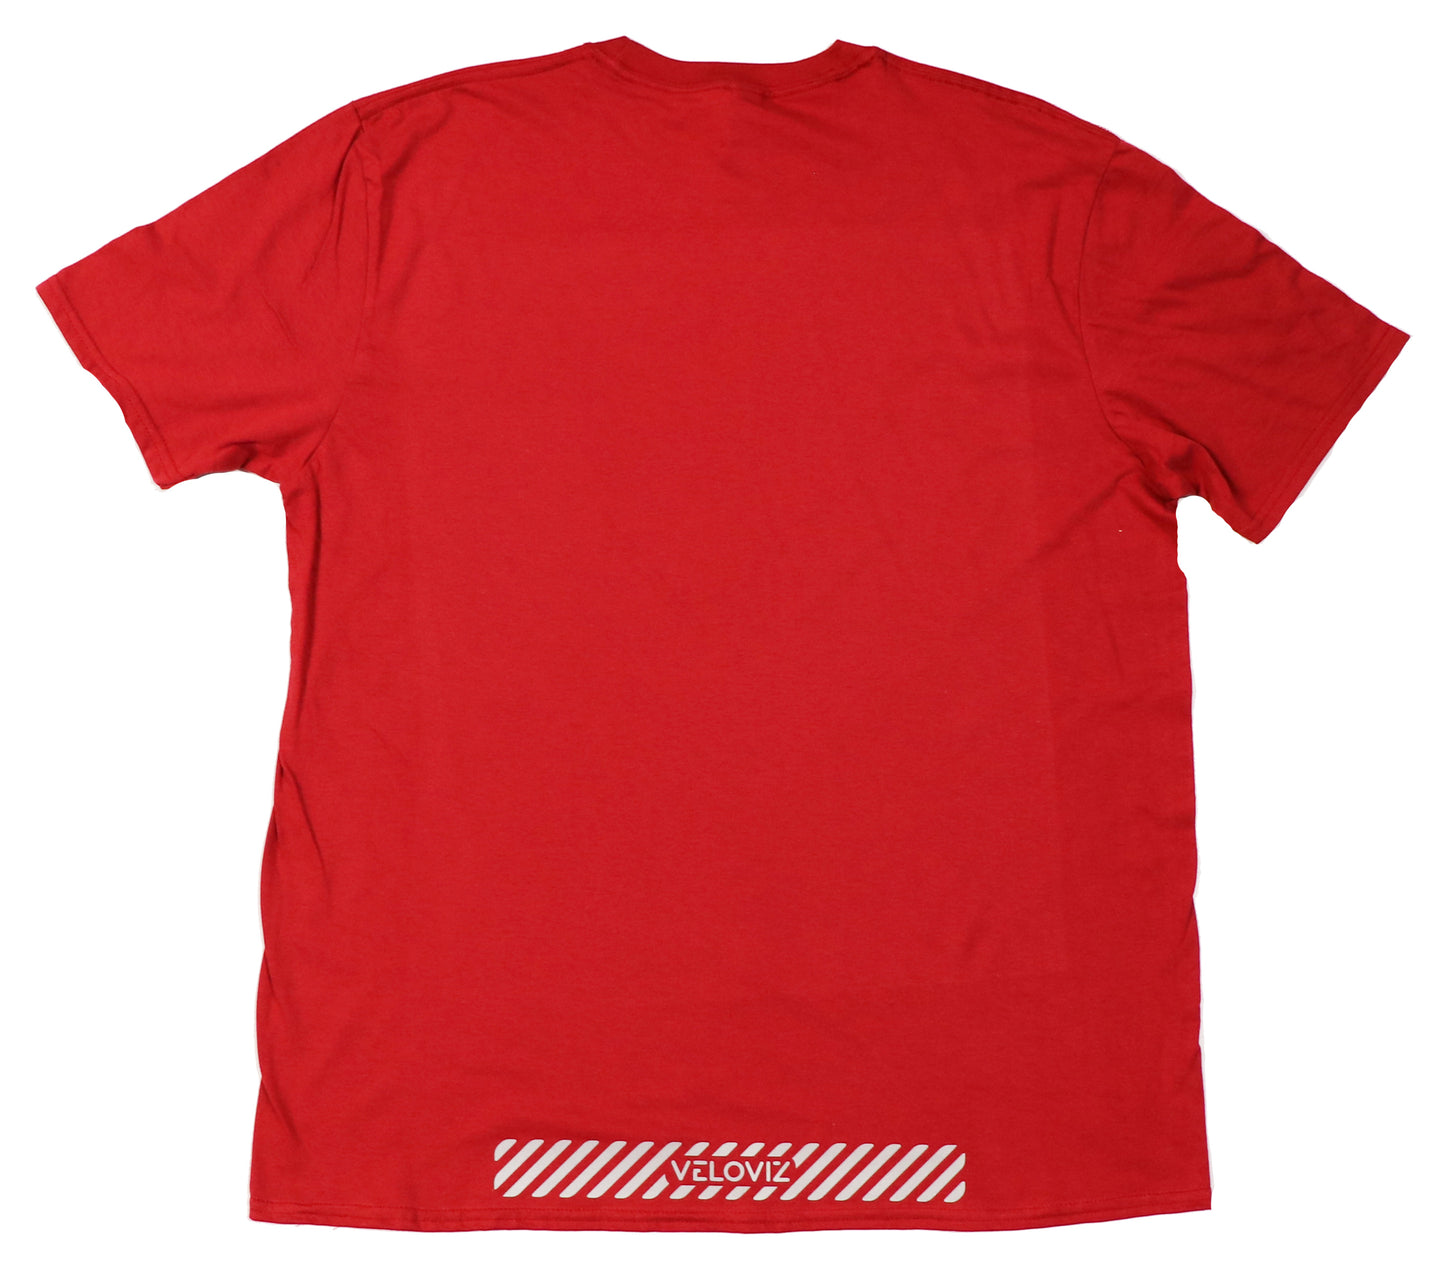 Reflective T Shirts - Good Vibes - Red (Mens)